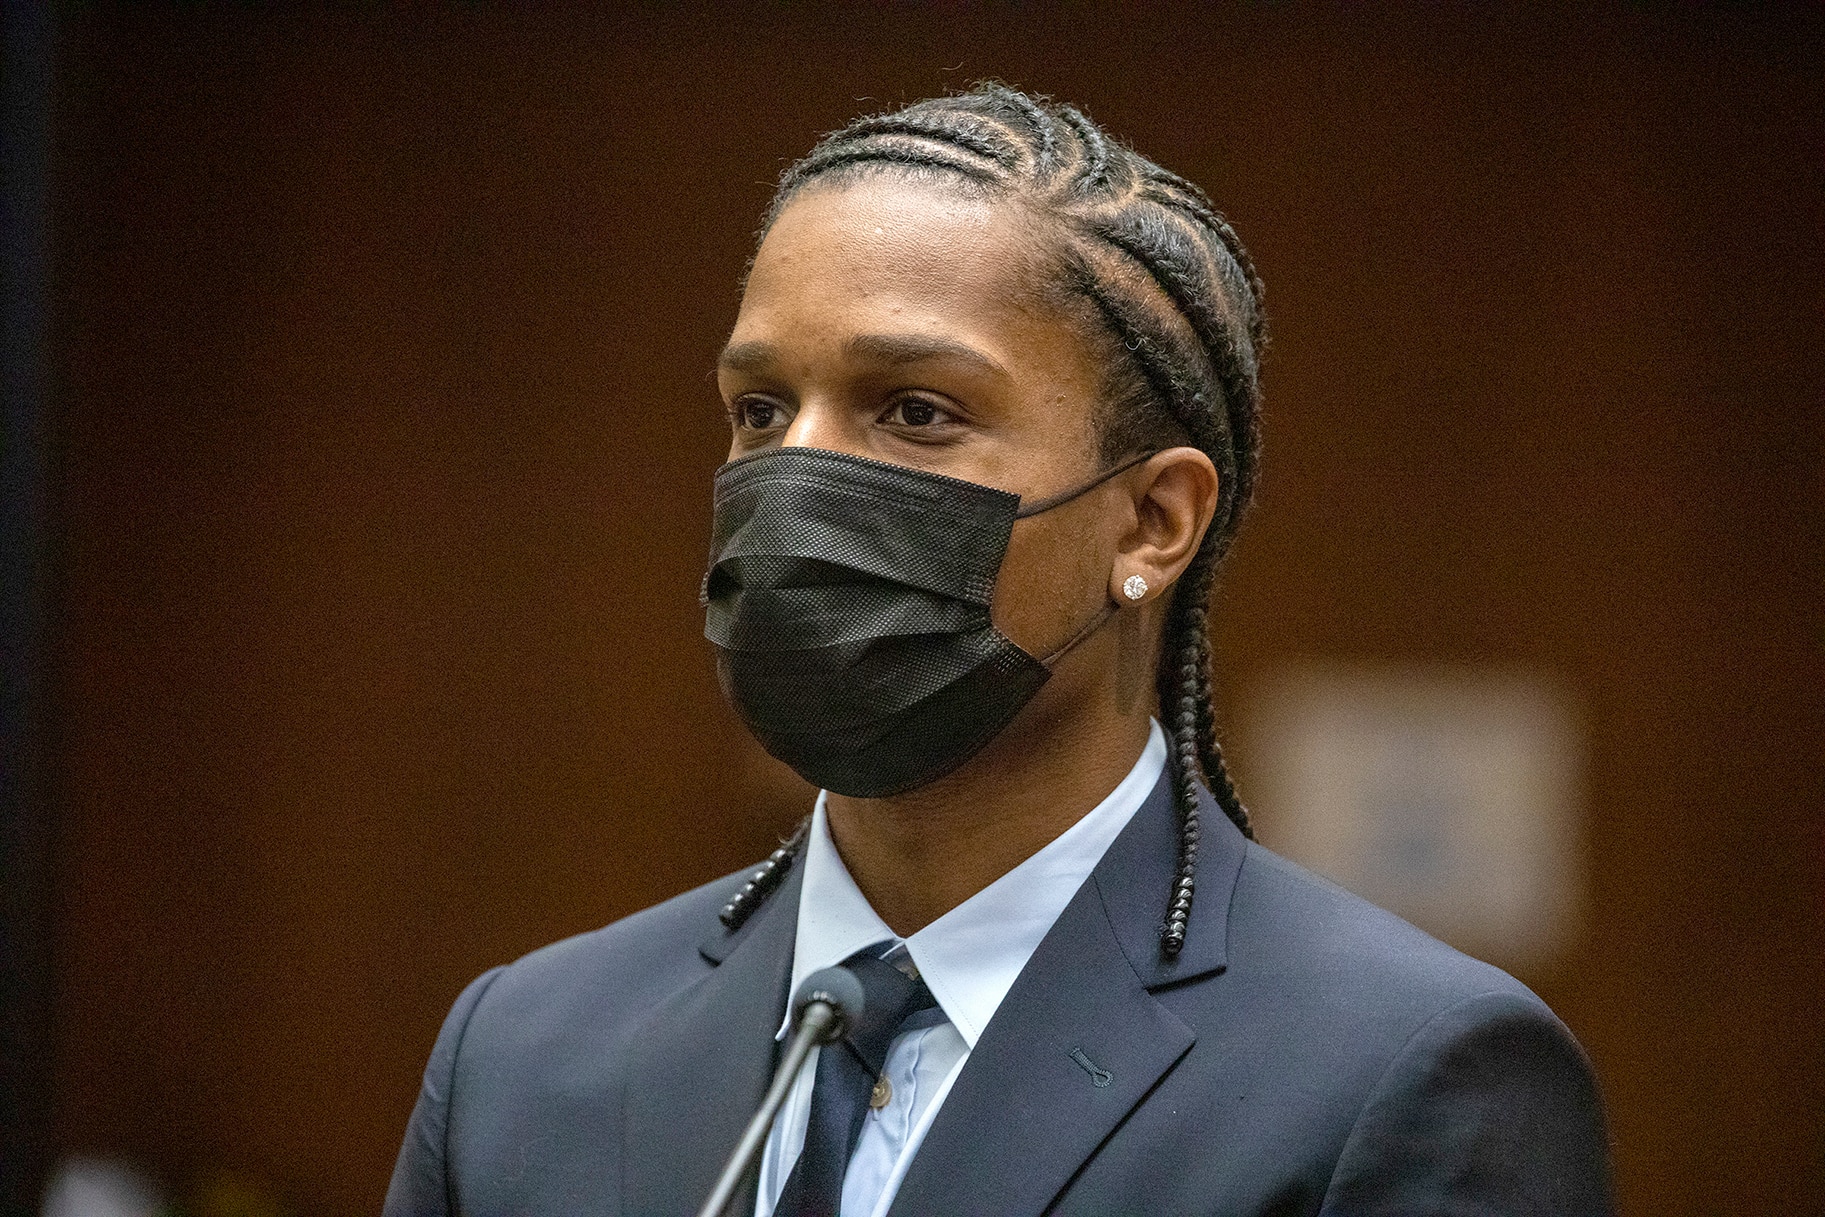 A$AP Rocky pleads not guilty to assault charges during his arraignment hearing